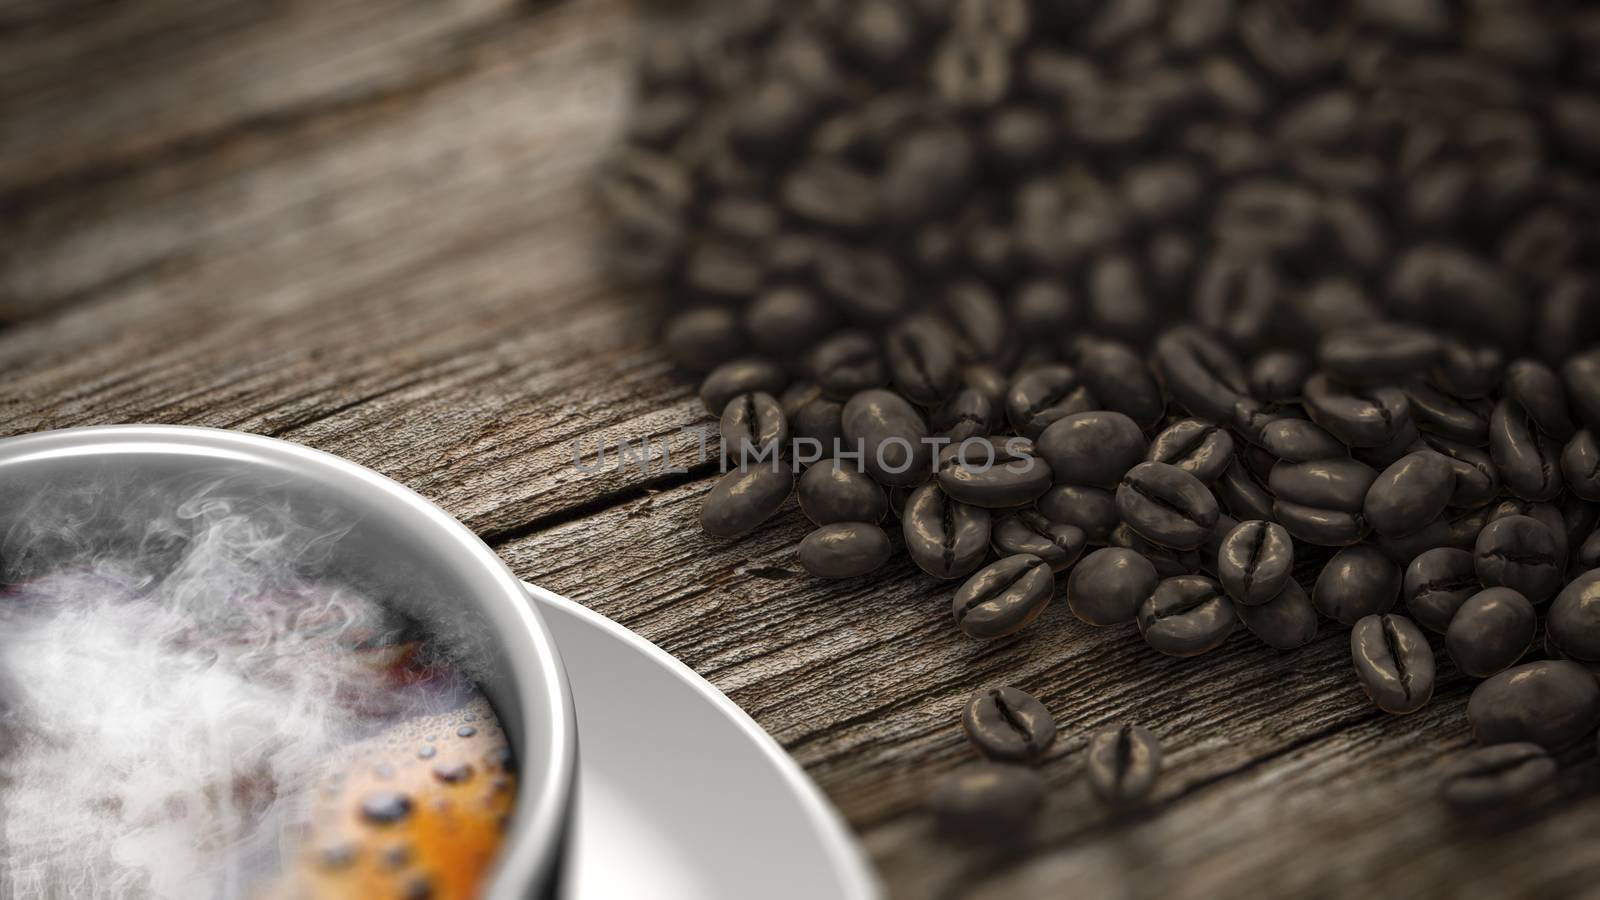 Closeup cup of coffee with smoke and coffee beans on an old wooden table. 3D Rendering.